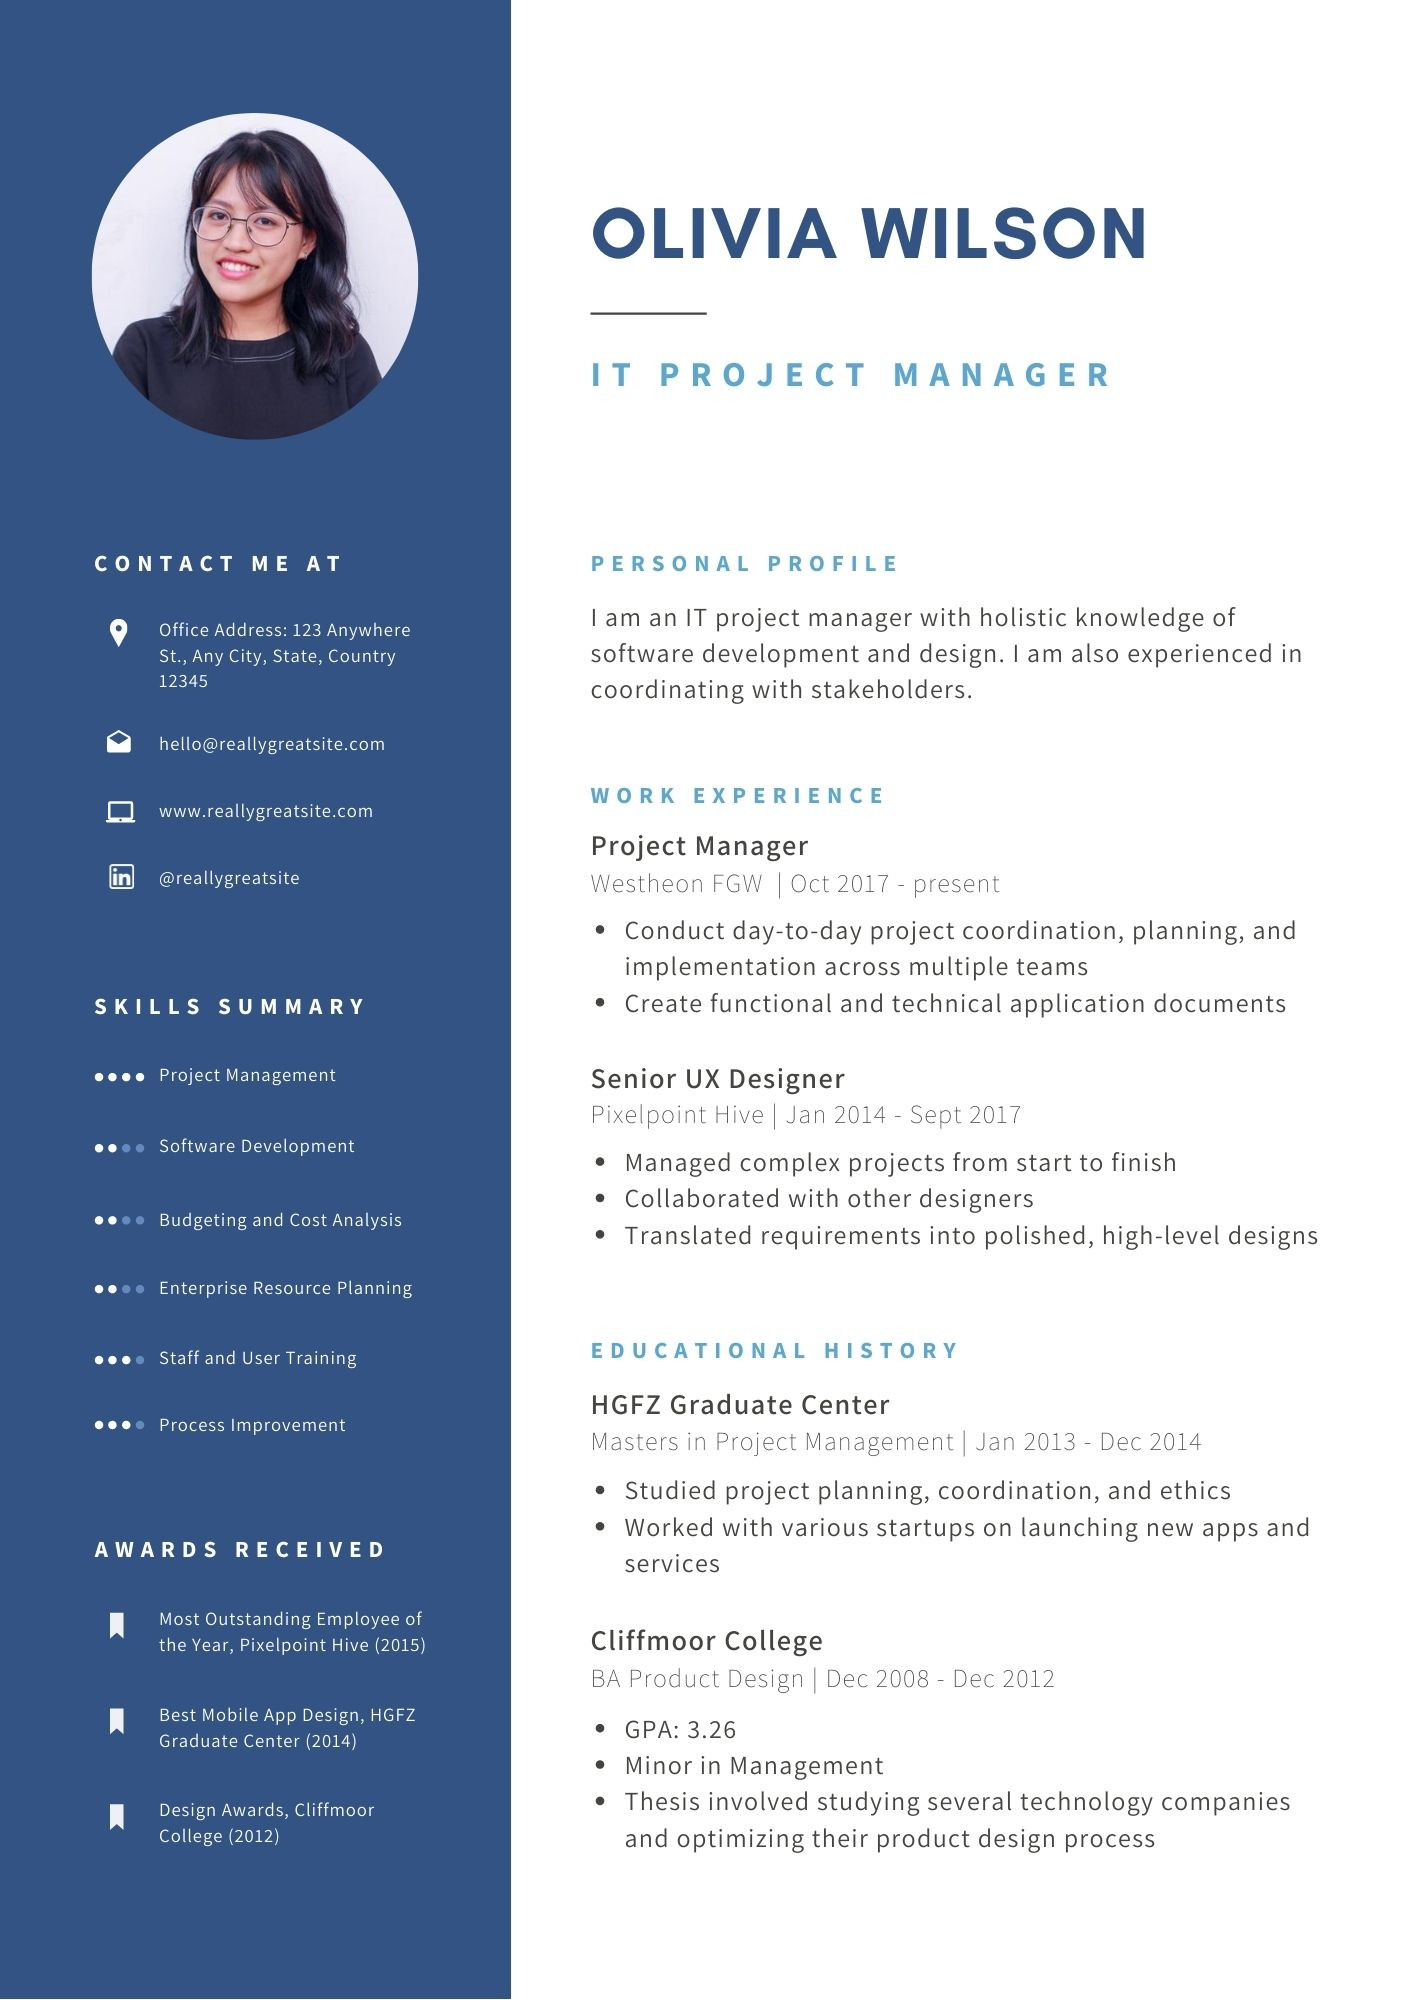 Mba Student Resume Samples No Experience Mba Resume Samples for Creating Eye-catchy Professional Resumes …